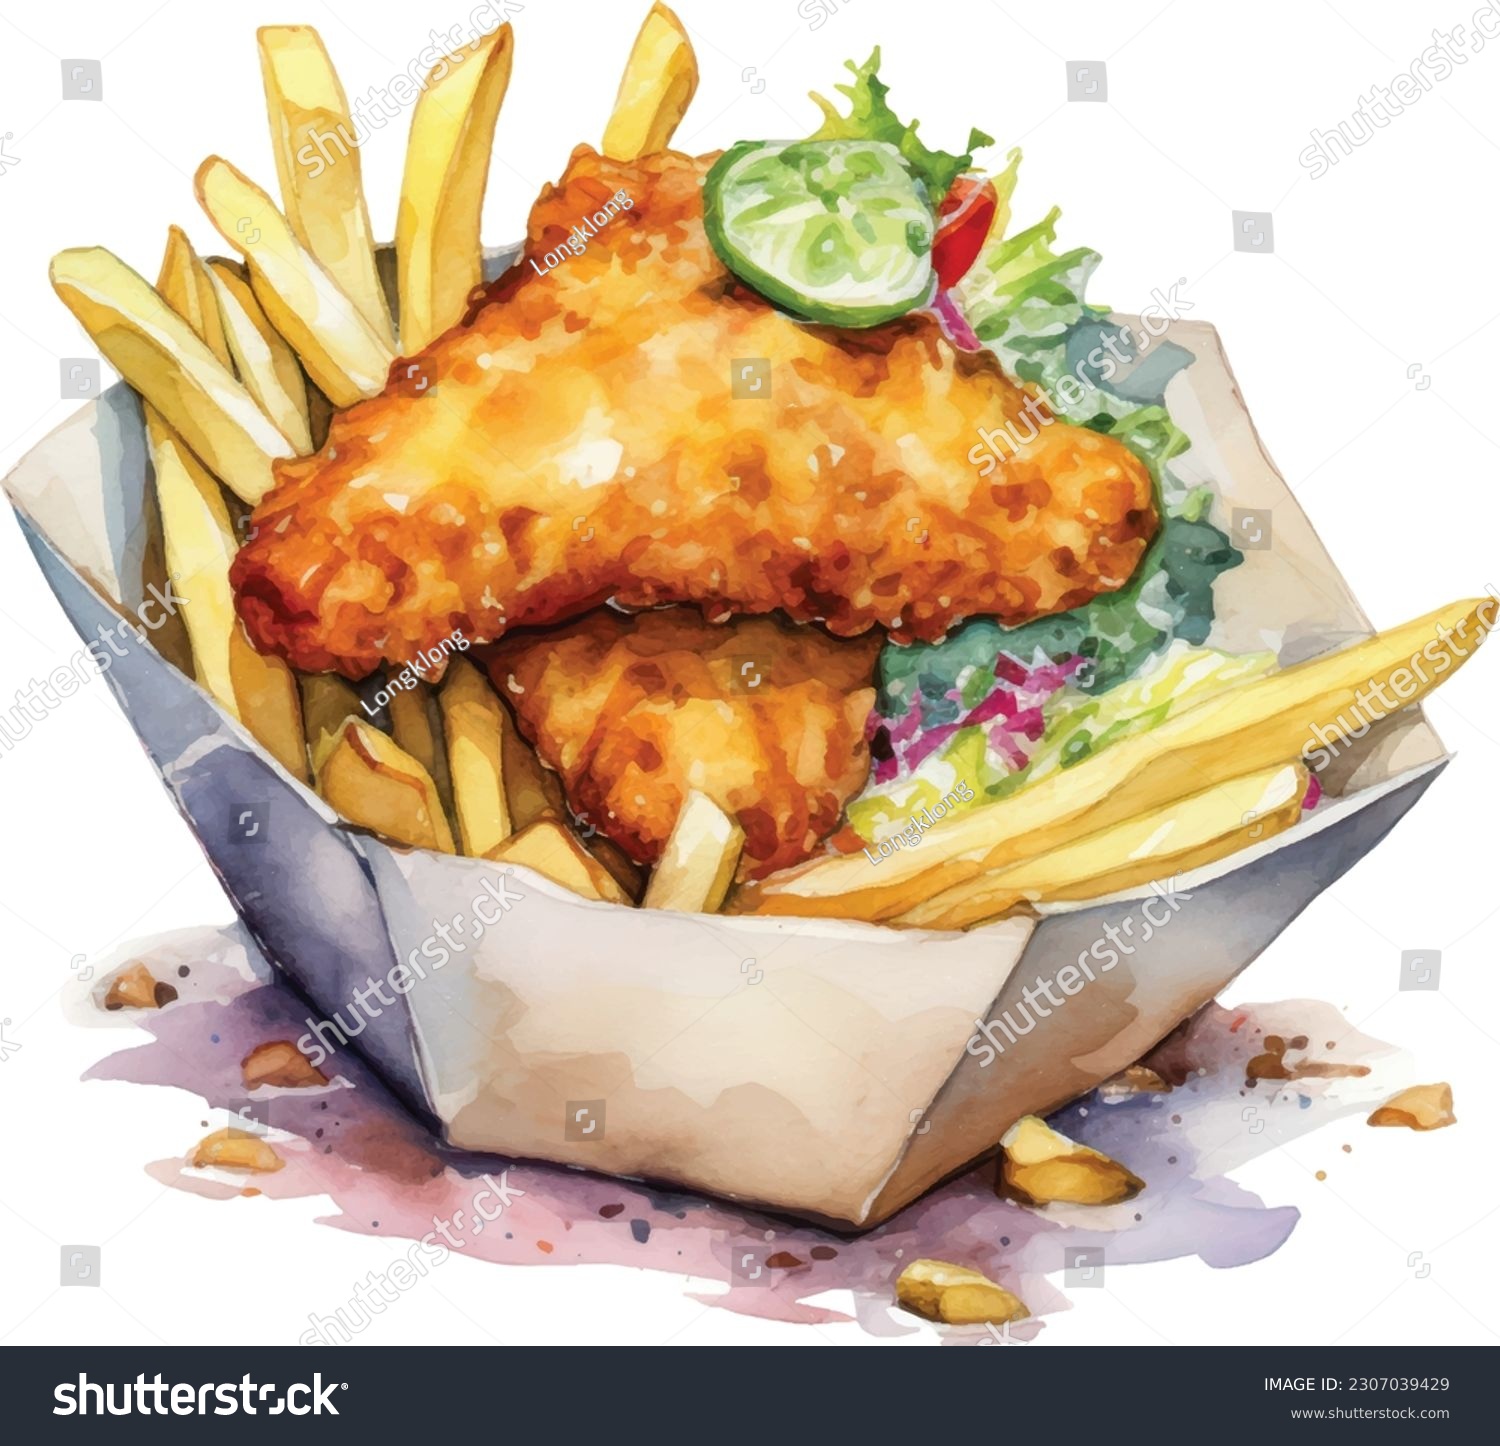 SVG of Fish and chips Watercolor .Traditional British food, paper-wrapped fish and chips with mashed peas. Suitable for restaurant menu design, flyers and cookbook. Illustration watercolor svg